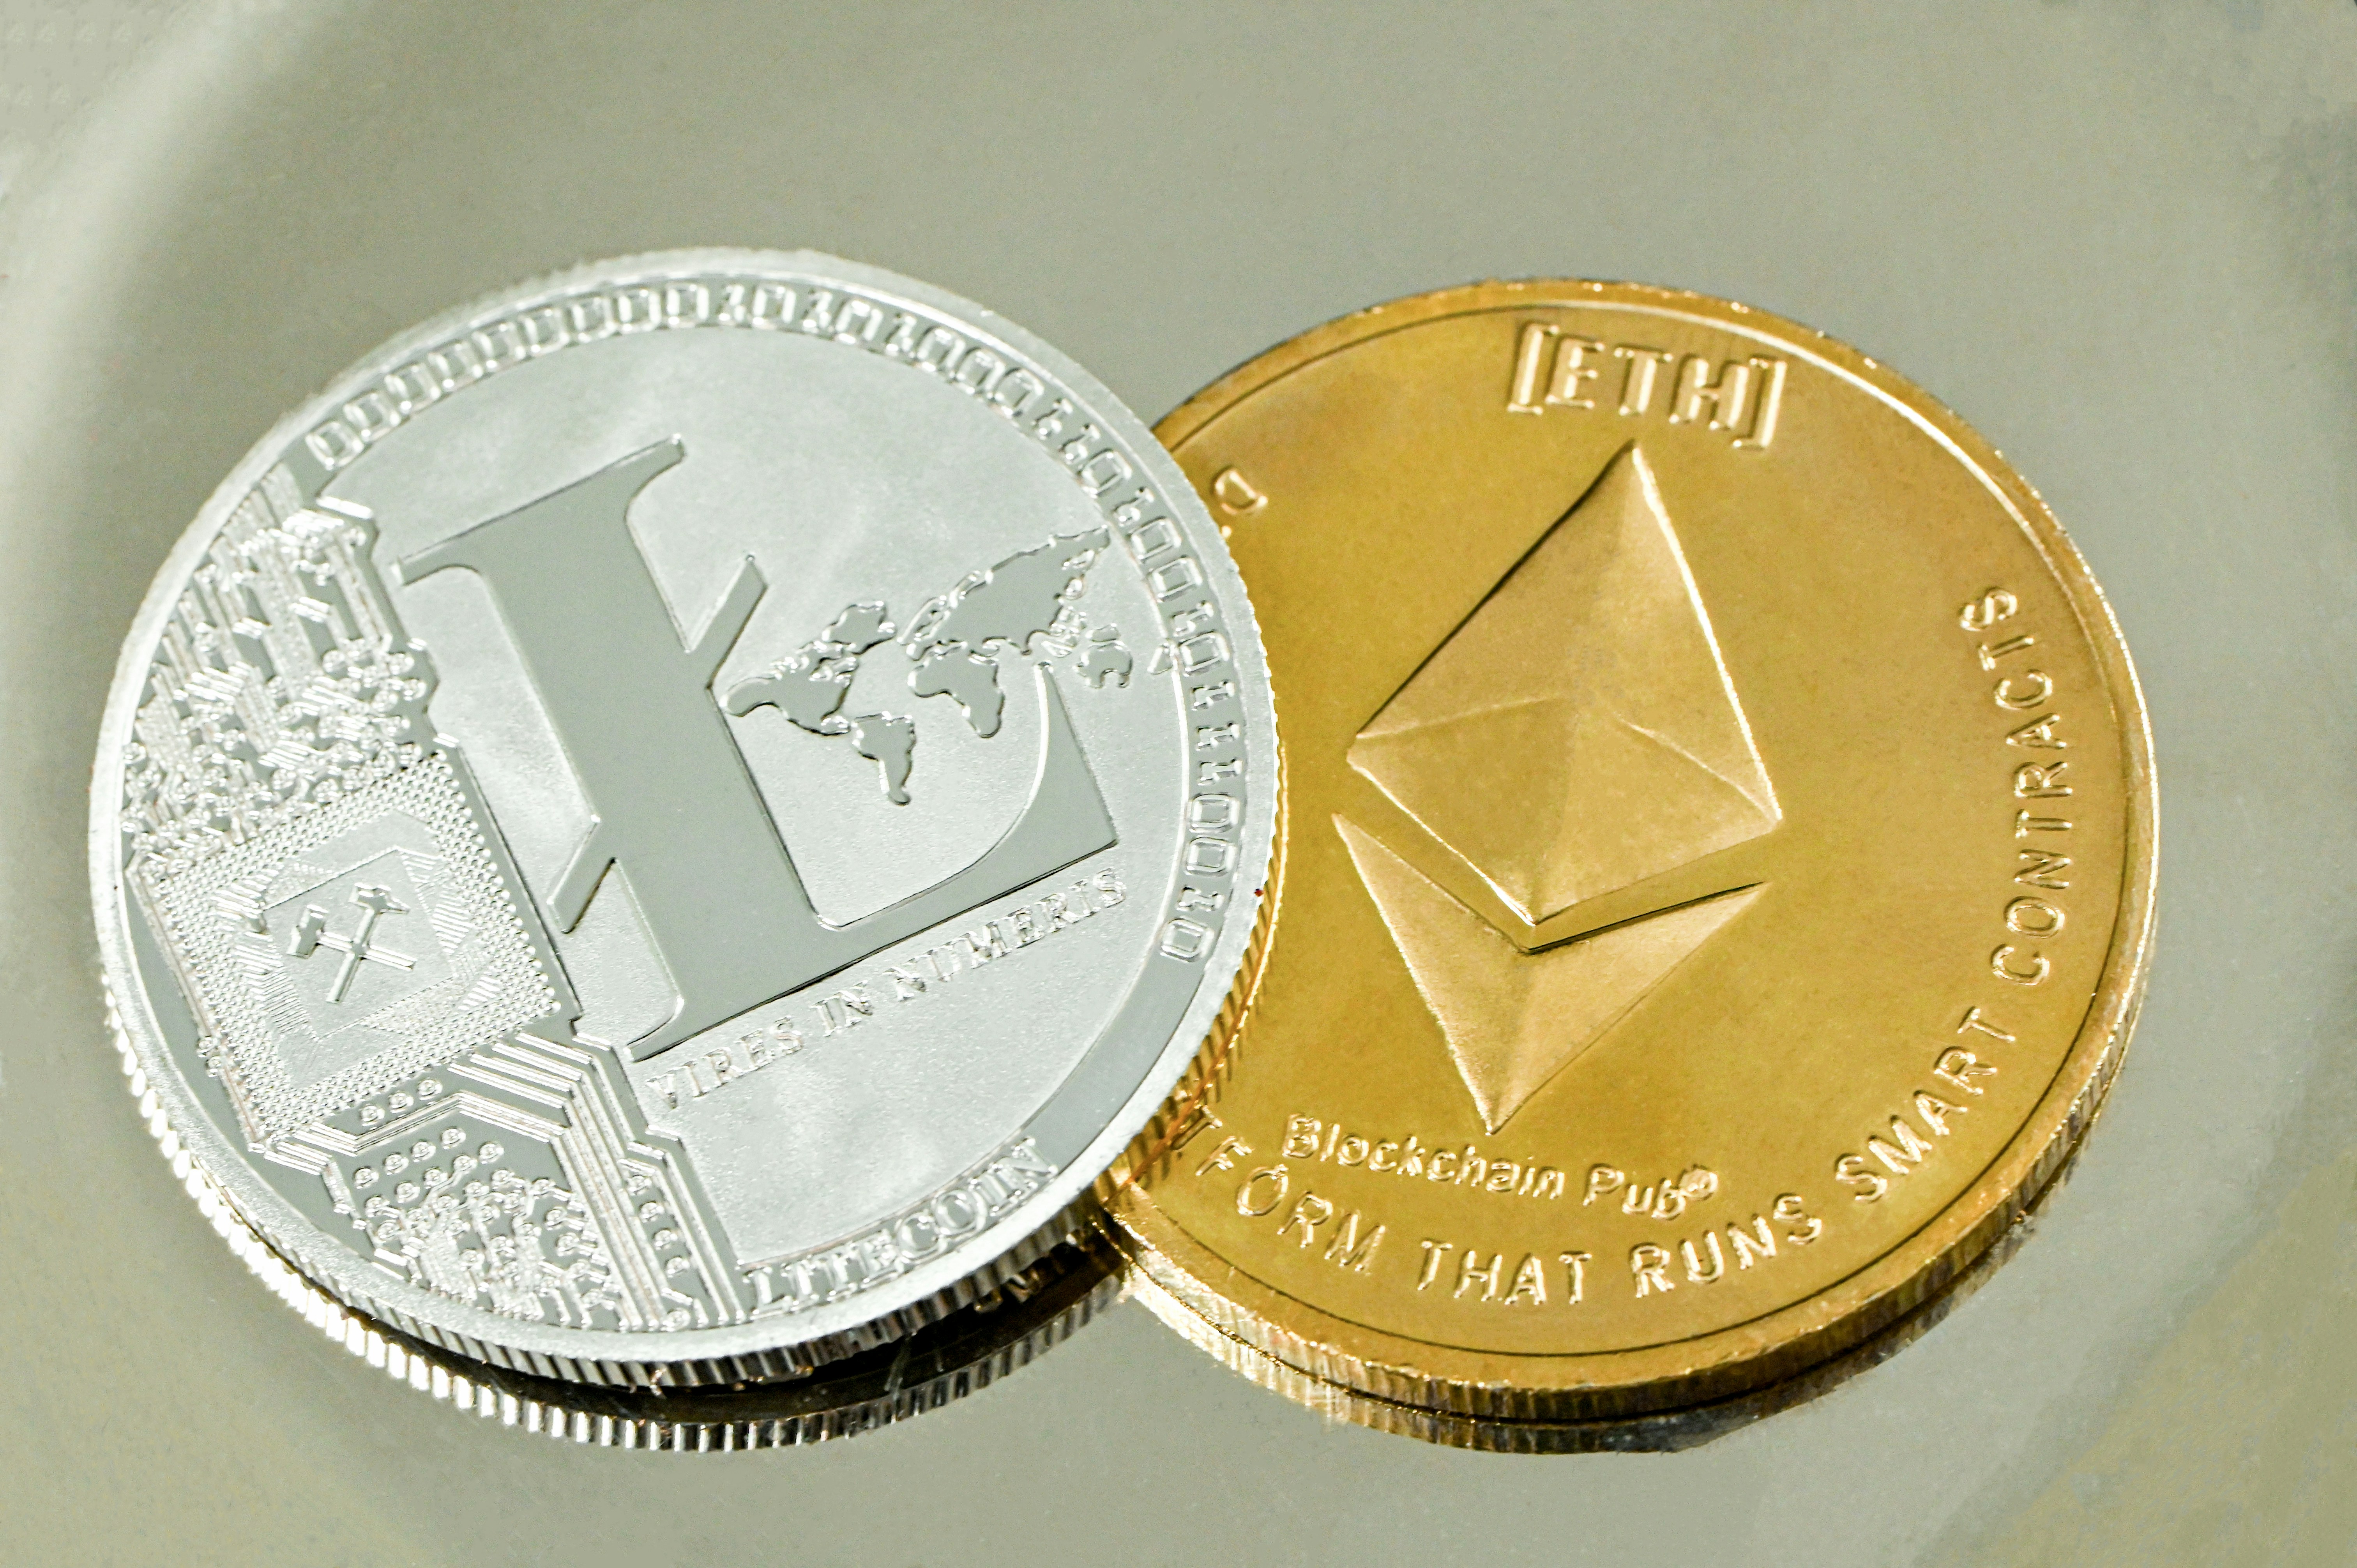 Litecoin and Ethereum next to each other